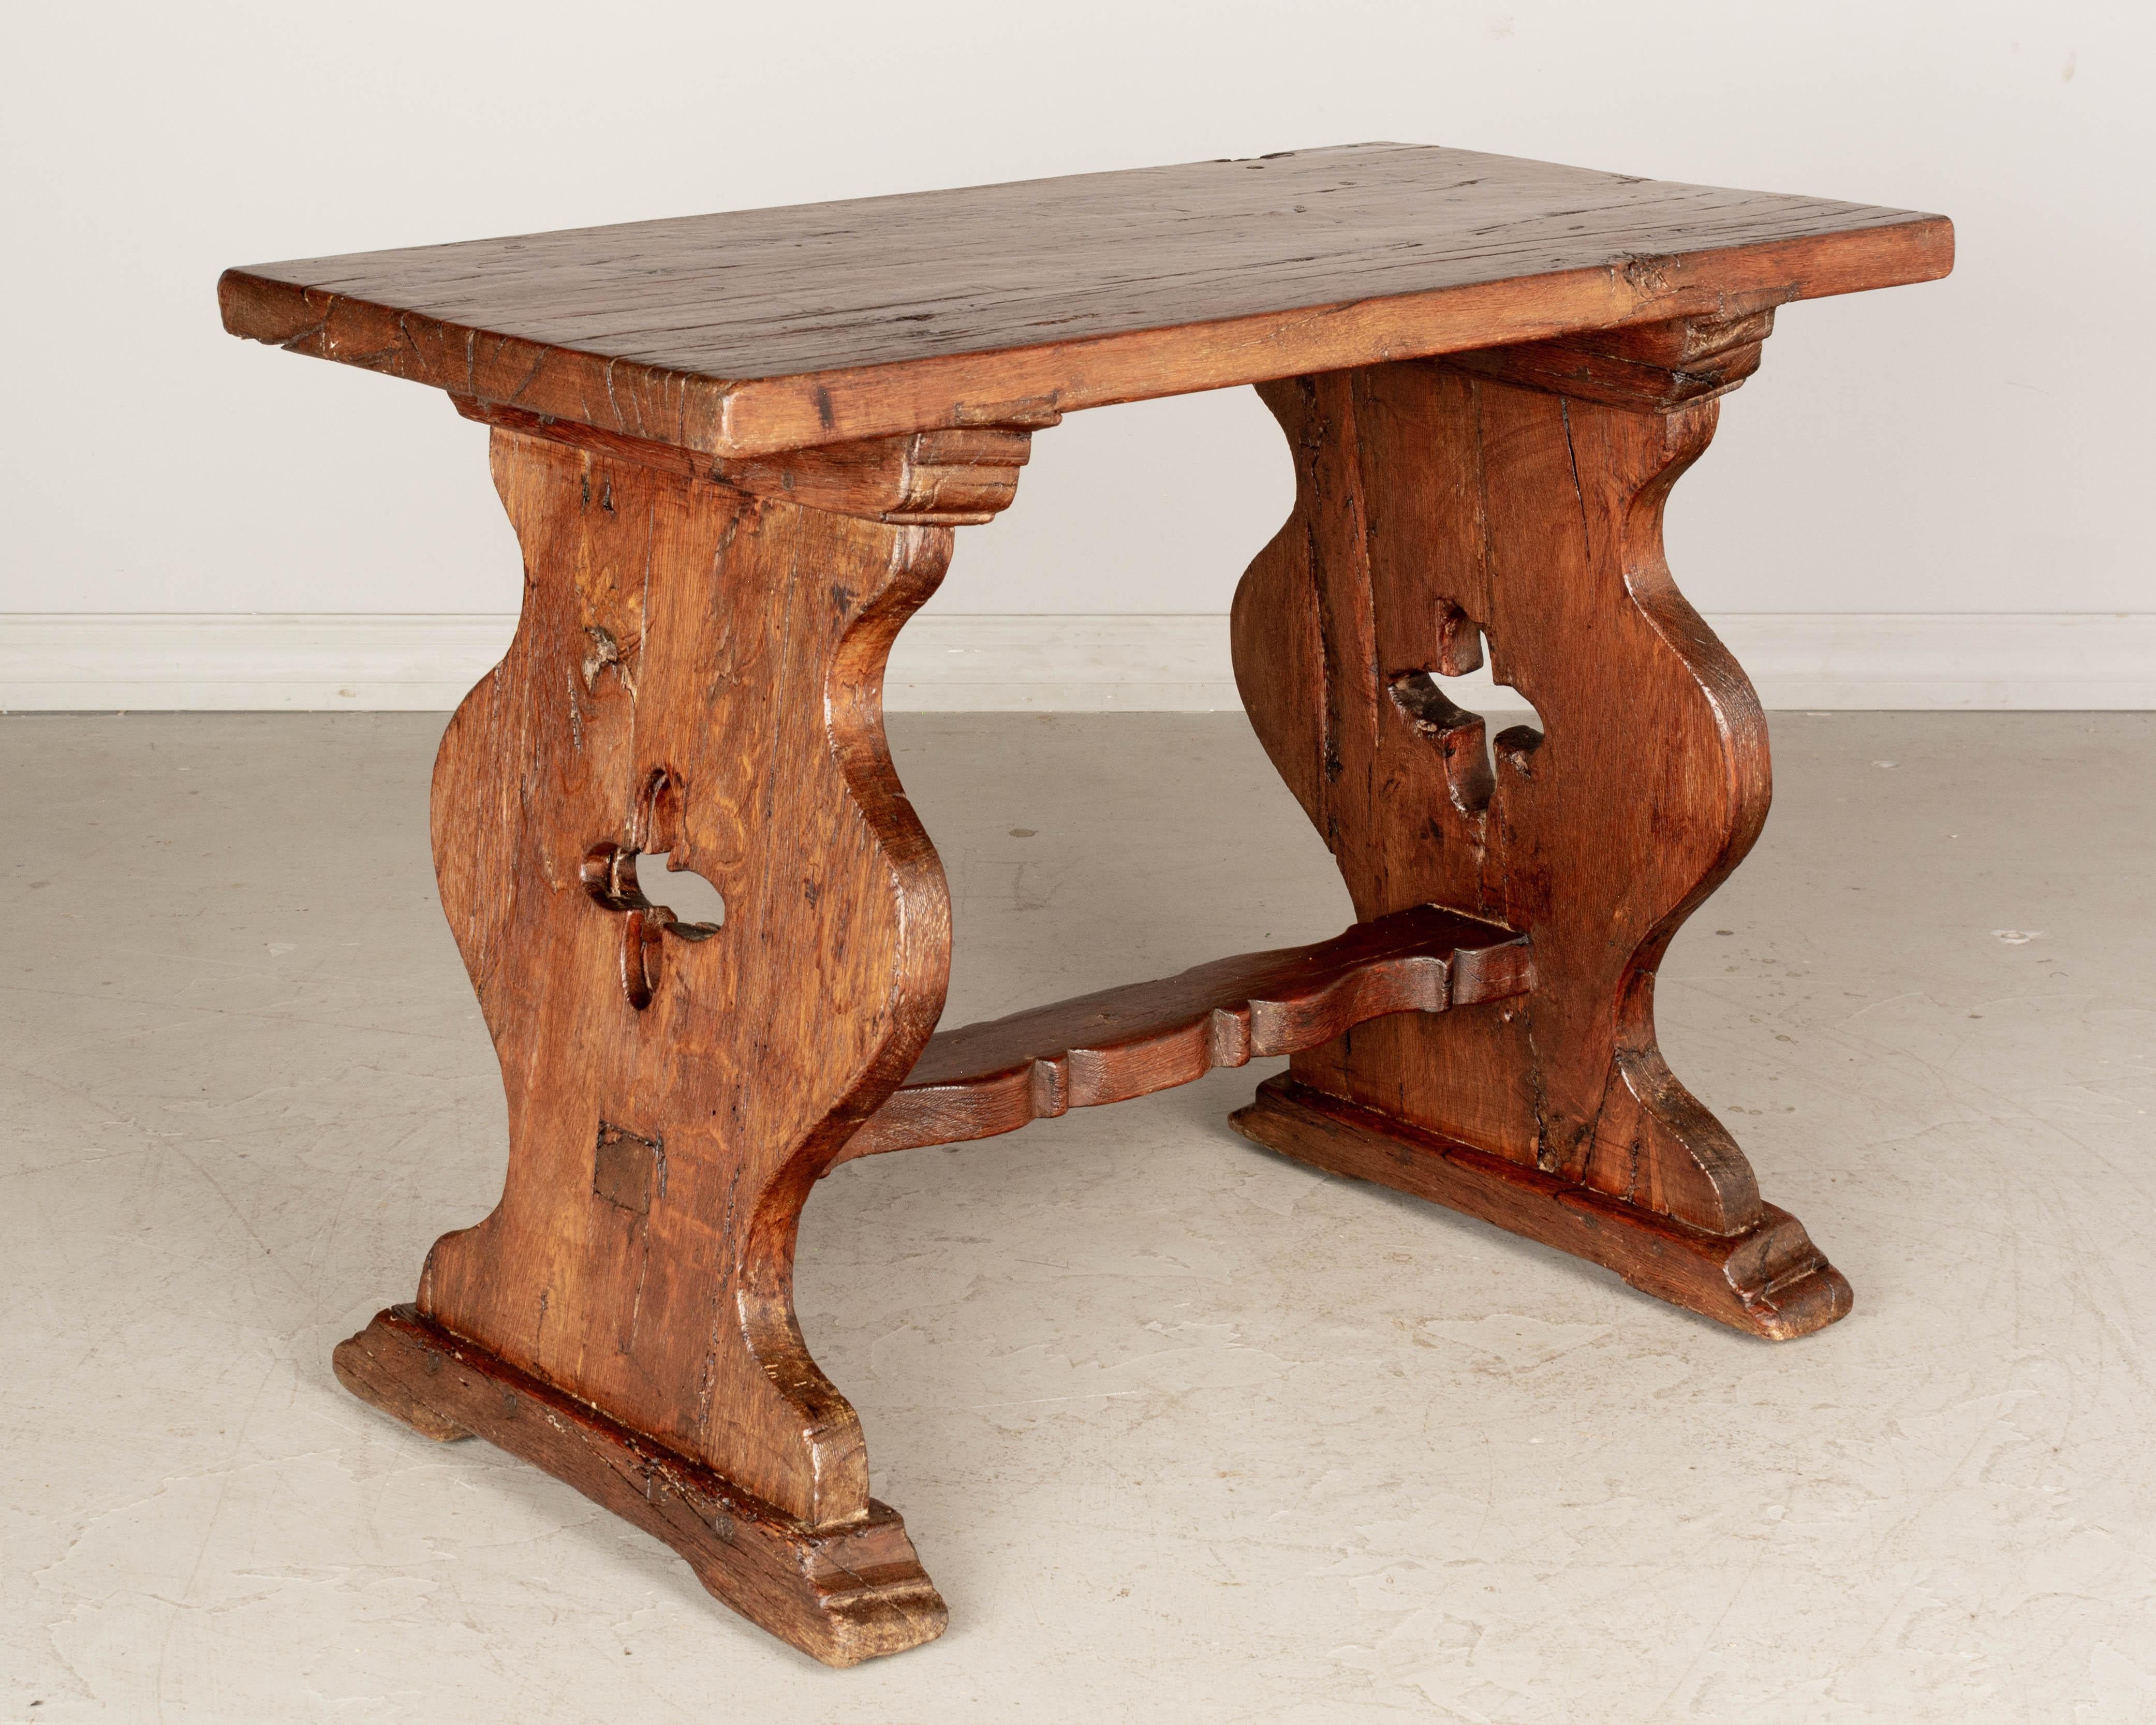 Hand-Crafted 19th Century Rustic Country French Side Table